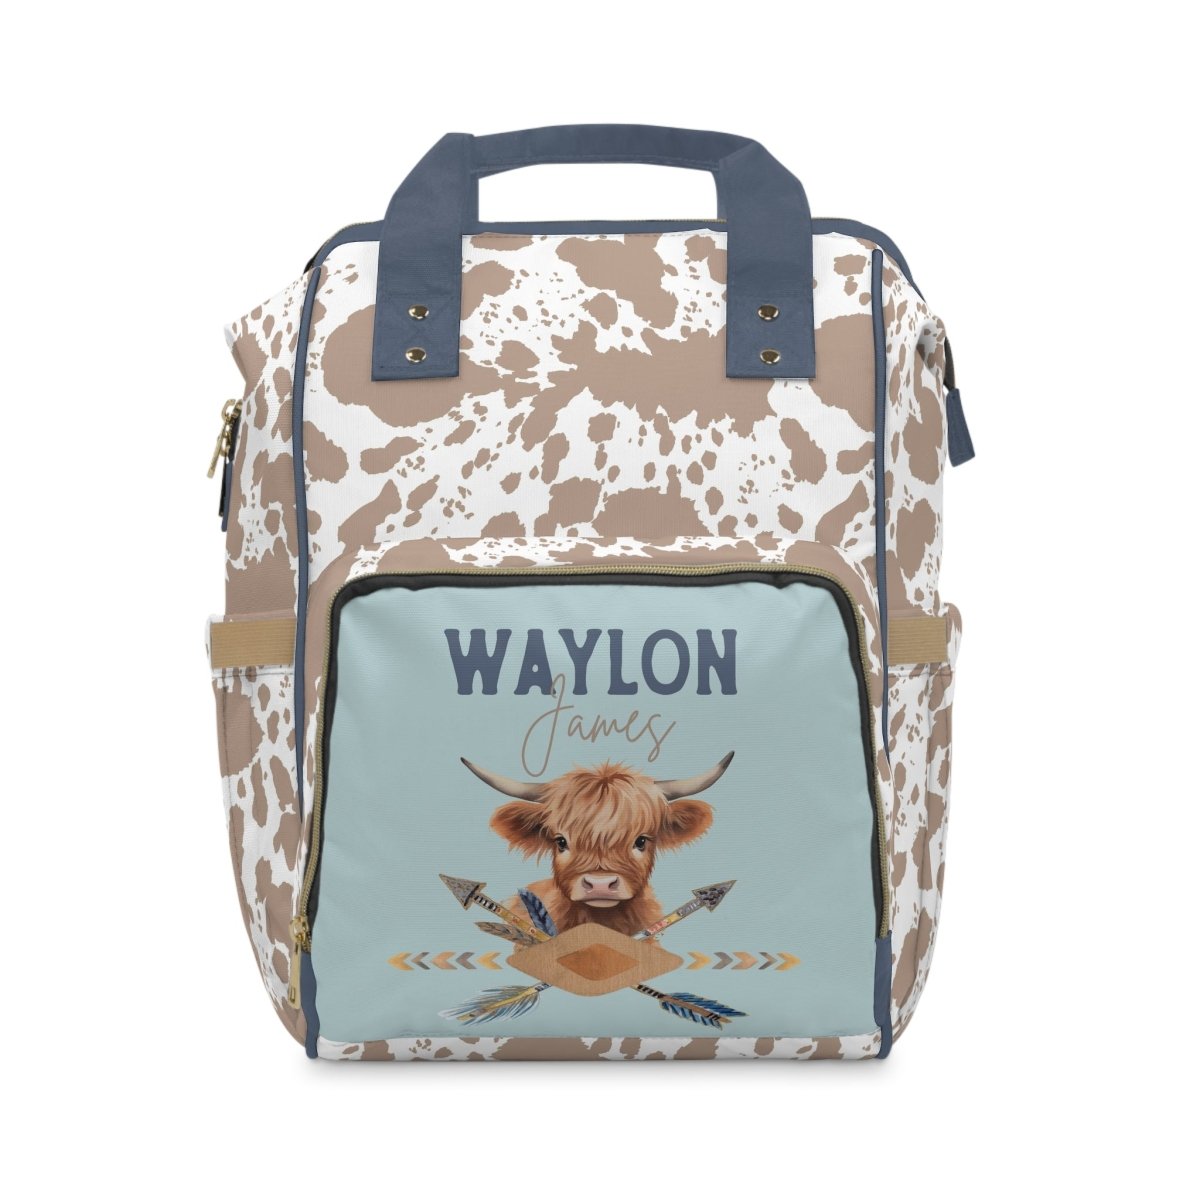 Blue Highland Cow Personalized Backpack Diaper Bag - Diaper Bag